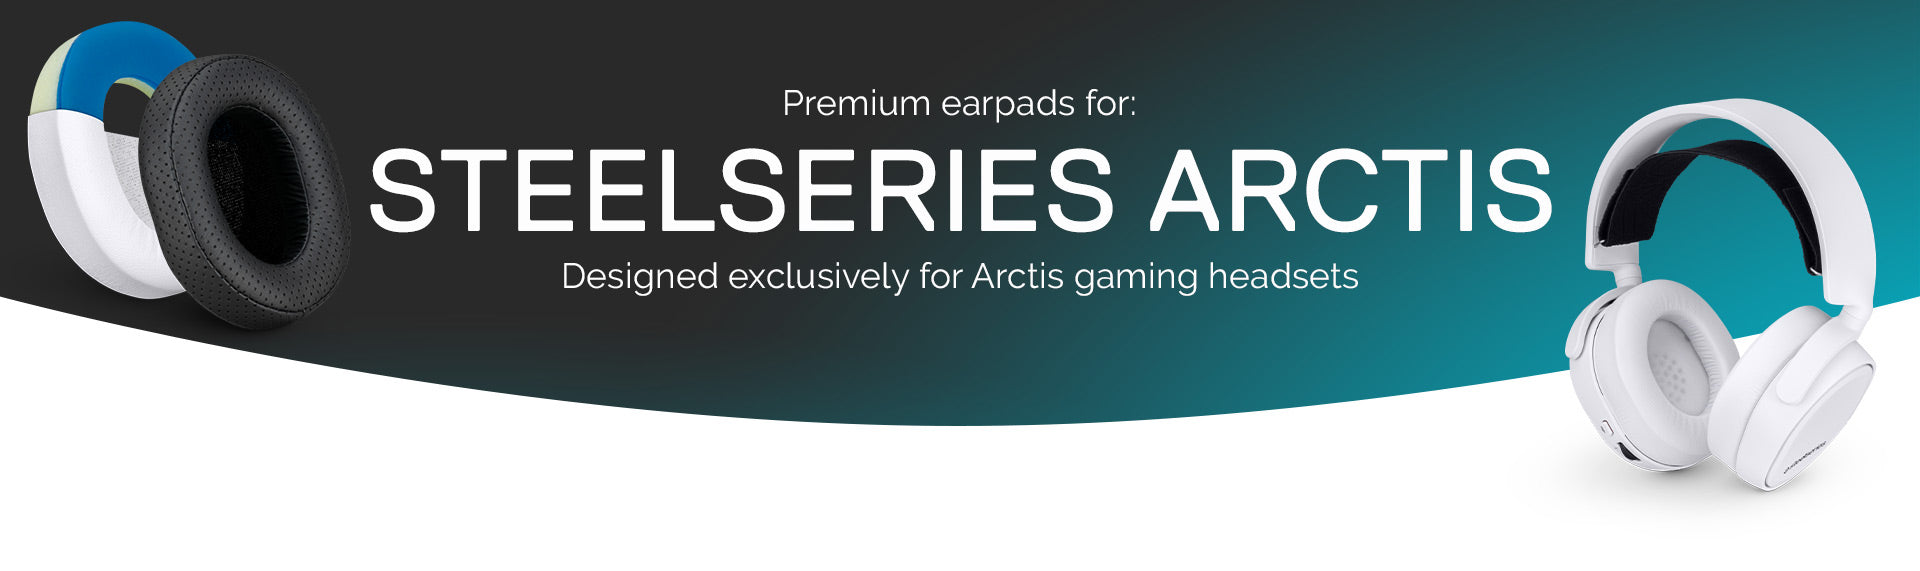 Designed for Steelseries Arctis Headsets